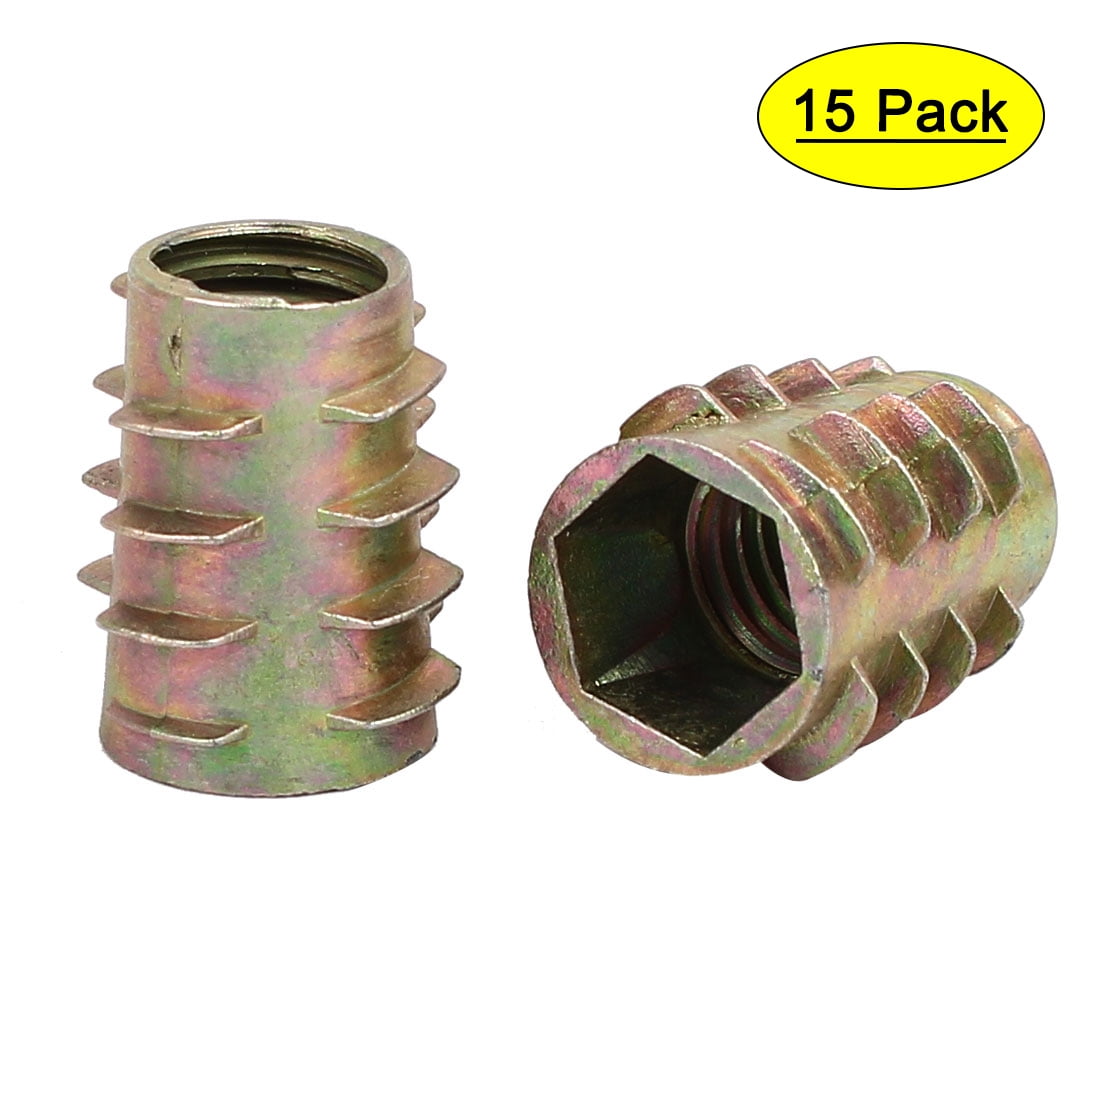 Yinpecly M10 Threaded Insert Nuts Zinc Alloy Hex Socket for Furniture Display Case Bronze Tone 20pcs 